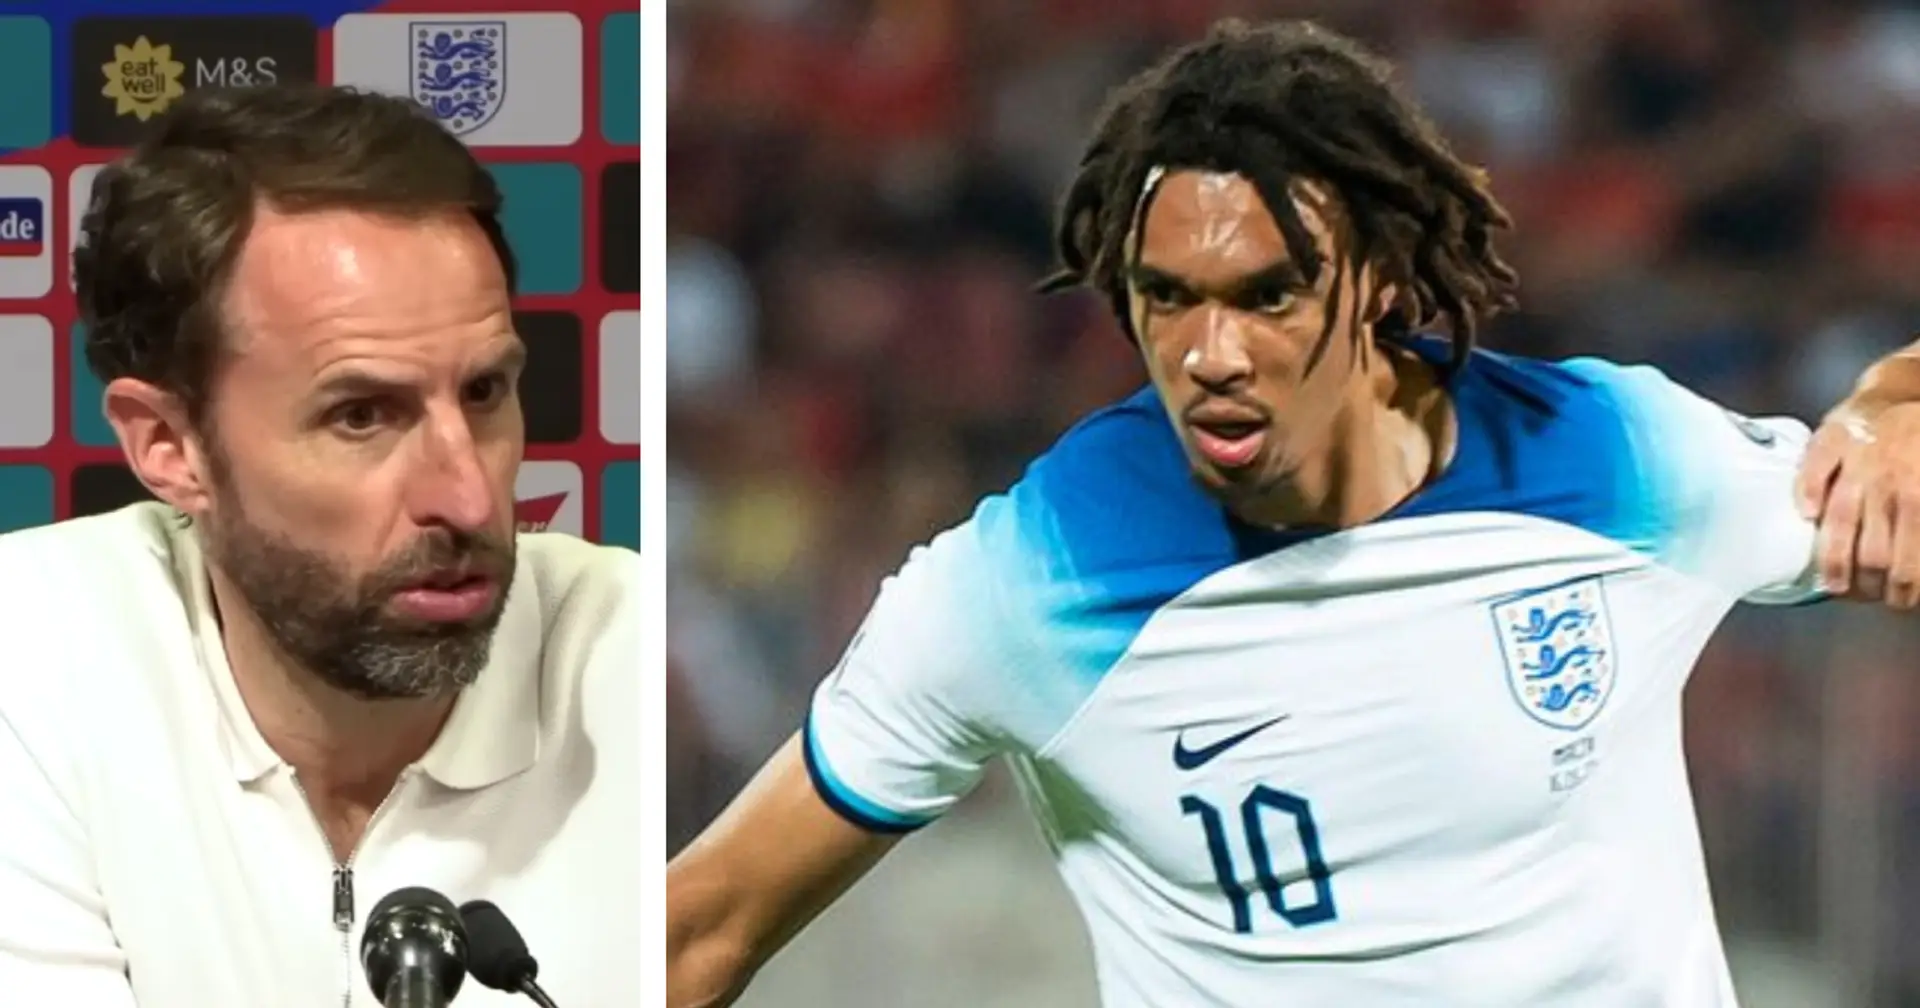 'I didn't think twice': Gareth Southgate opens up on Trent's new role